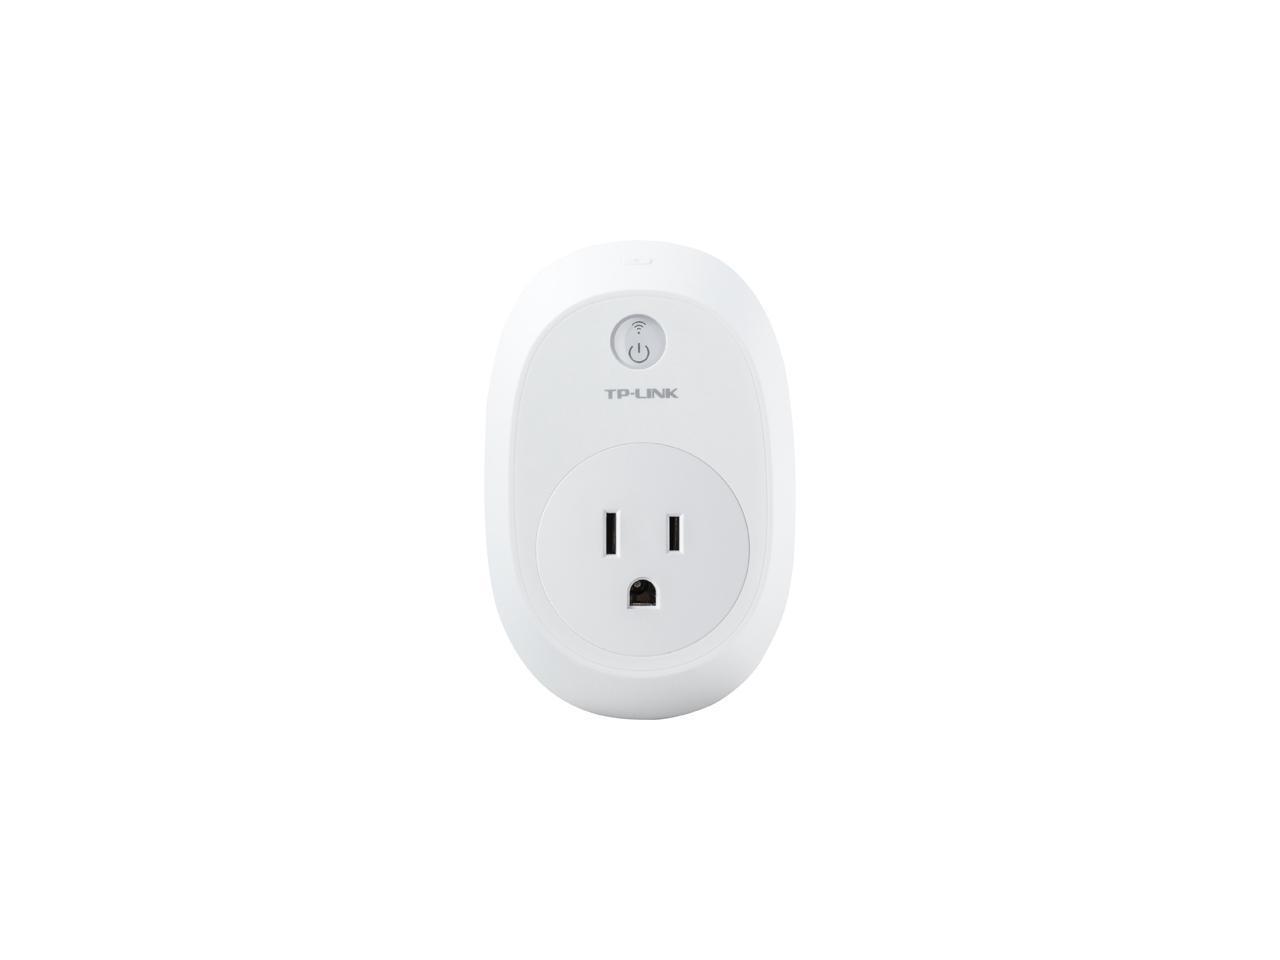 TP-LINK HS110 Smart Plug, Wi-Fi Enabled, Control Your Electronics from Anywhere, Energy Monitoring, Compatible with Google Home and Amazon Echo Alexa